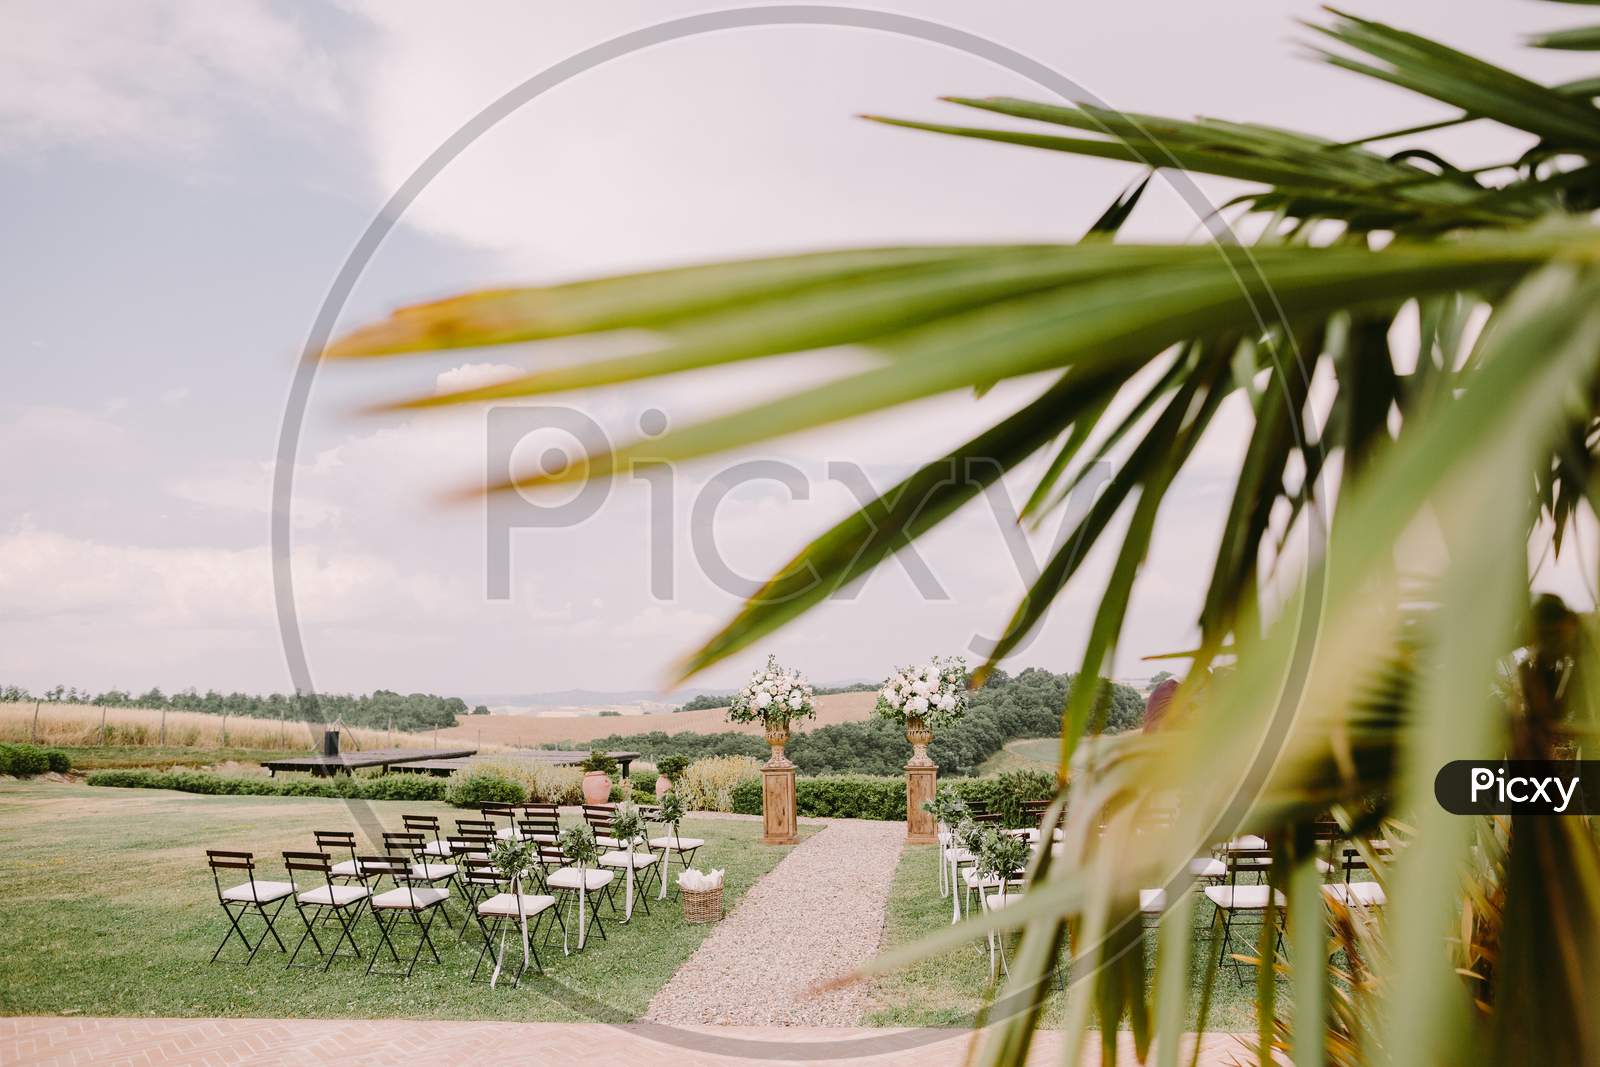 Chic Wedding Venue In Tuscany Italy